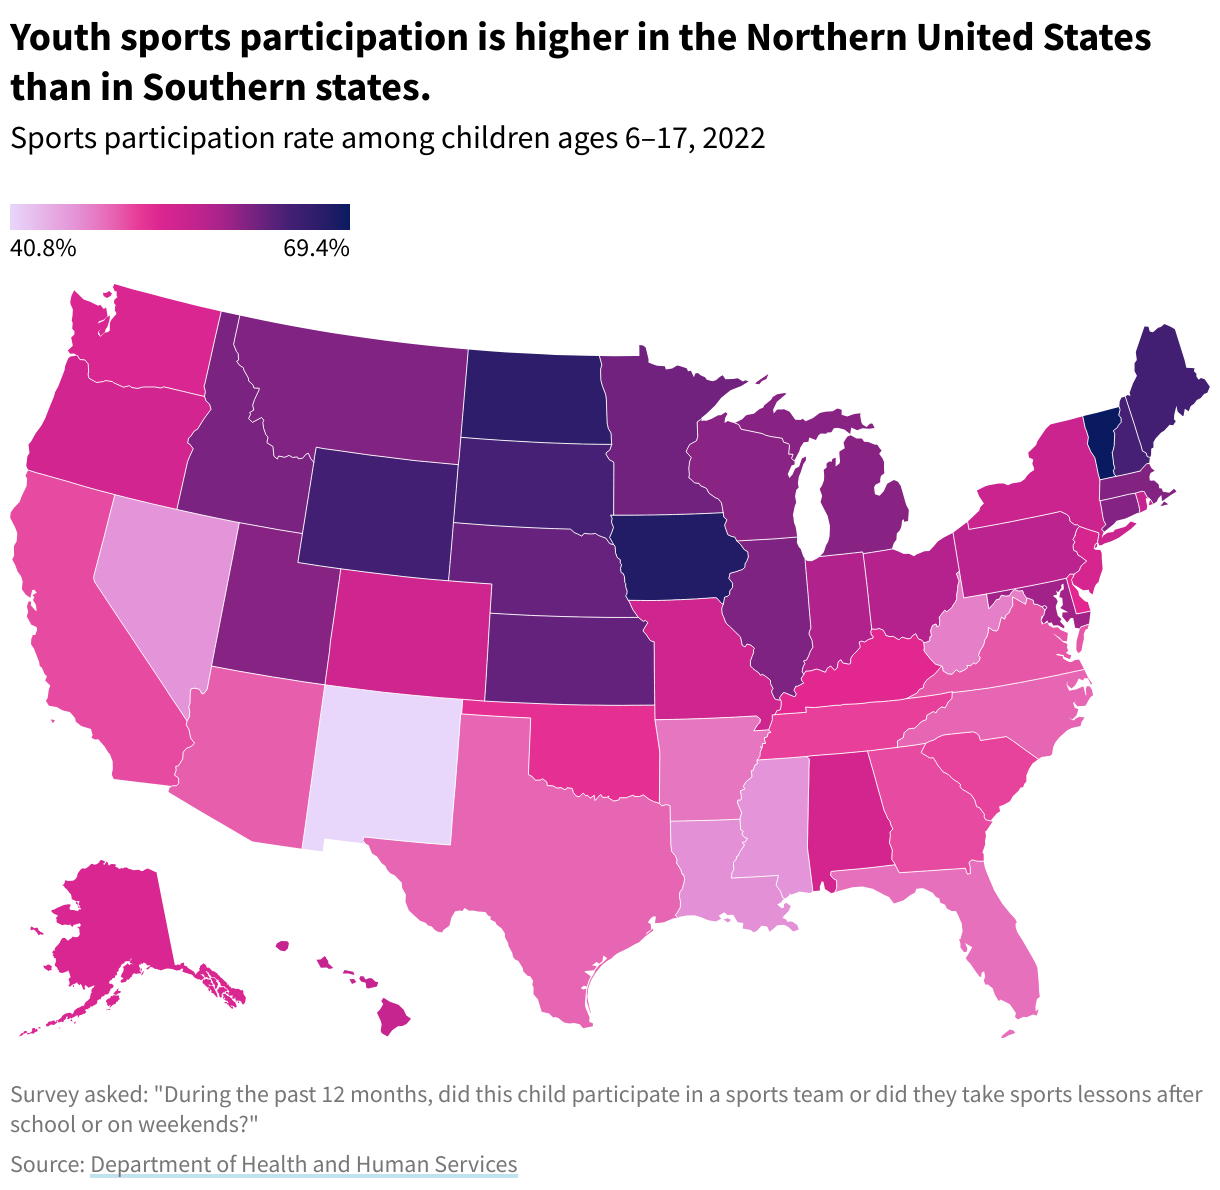 A map with states colored by youth sports participation rate. Rates are higher in the Northern US.